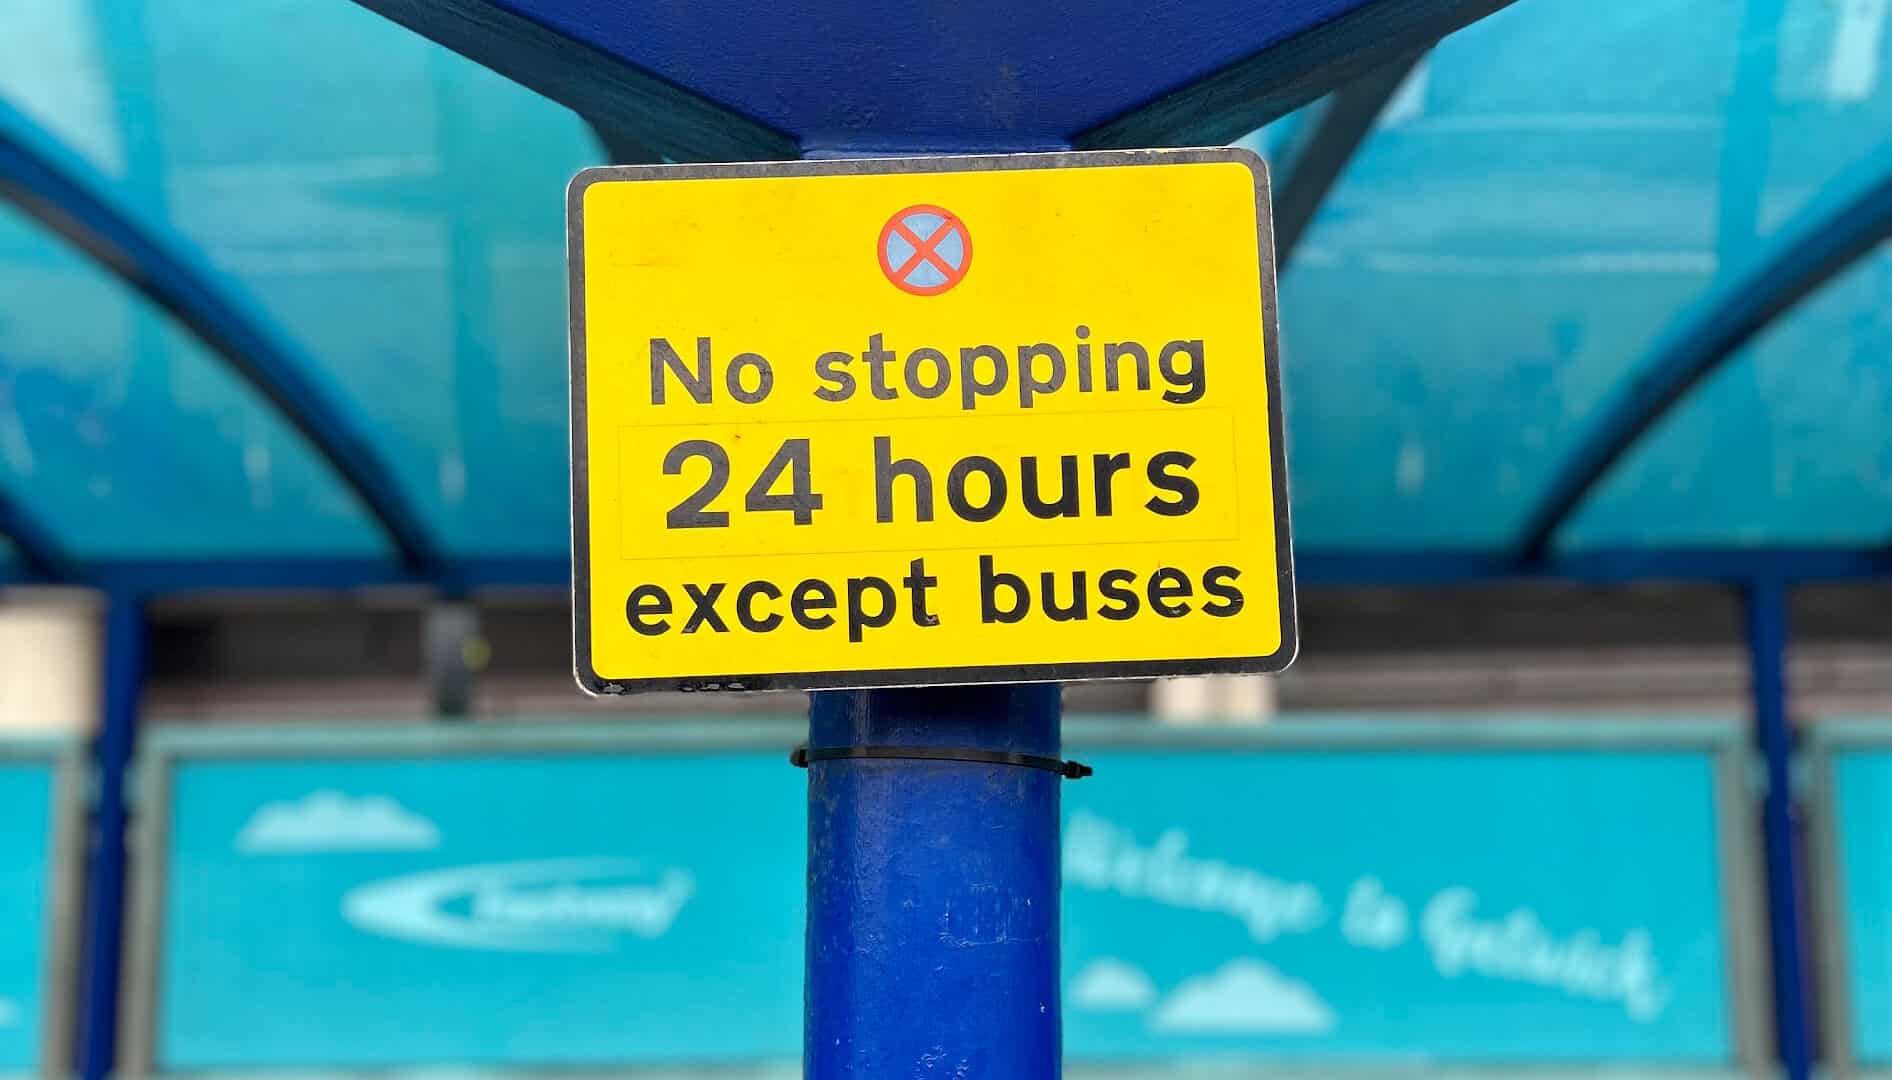 A road sign at a bus stop showing 